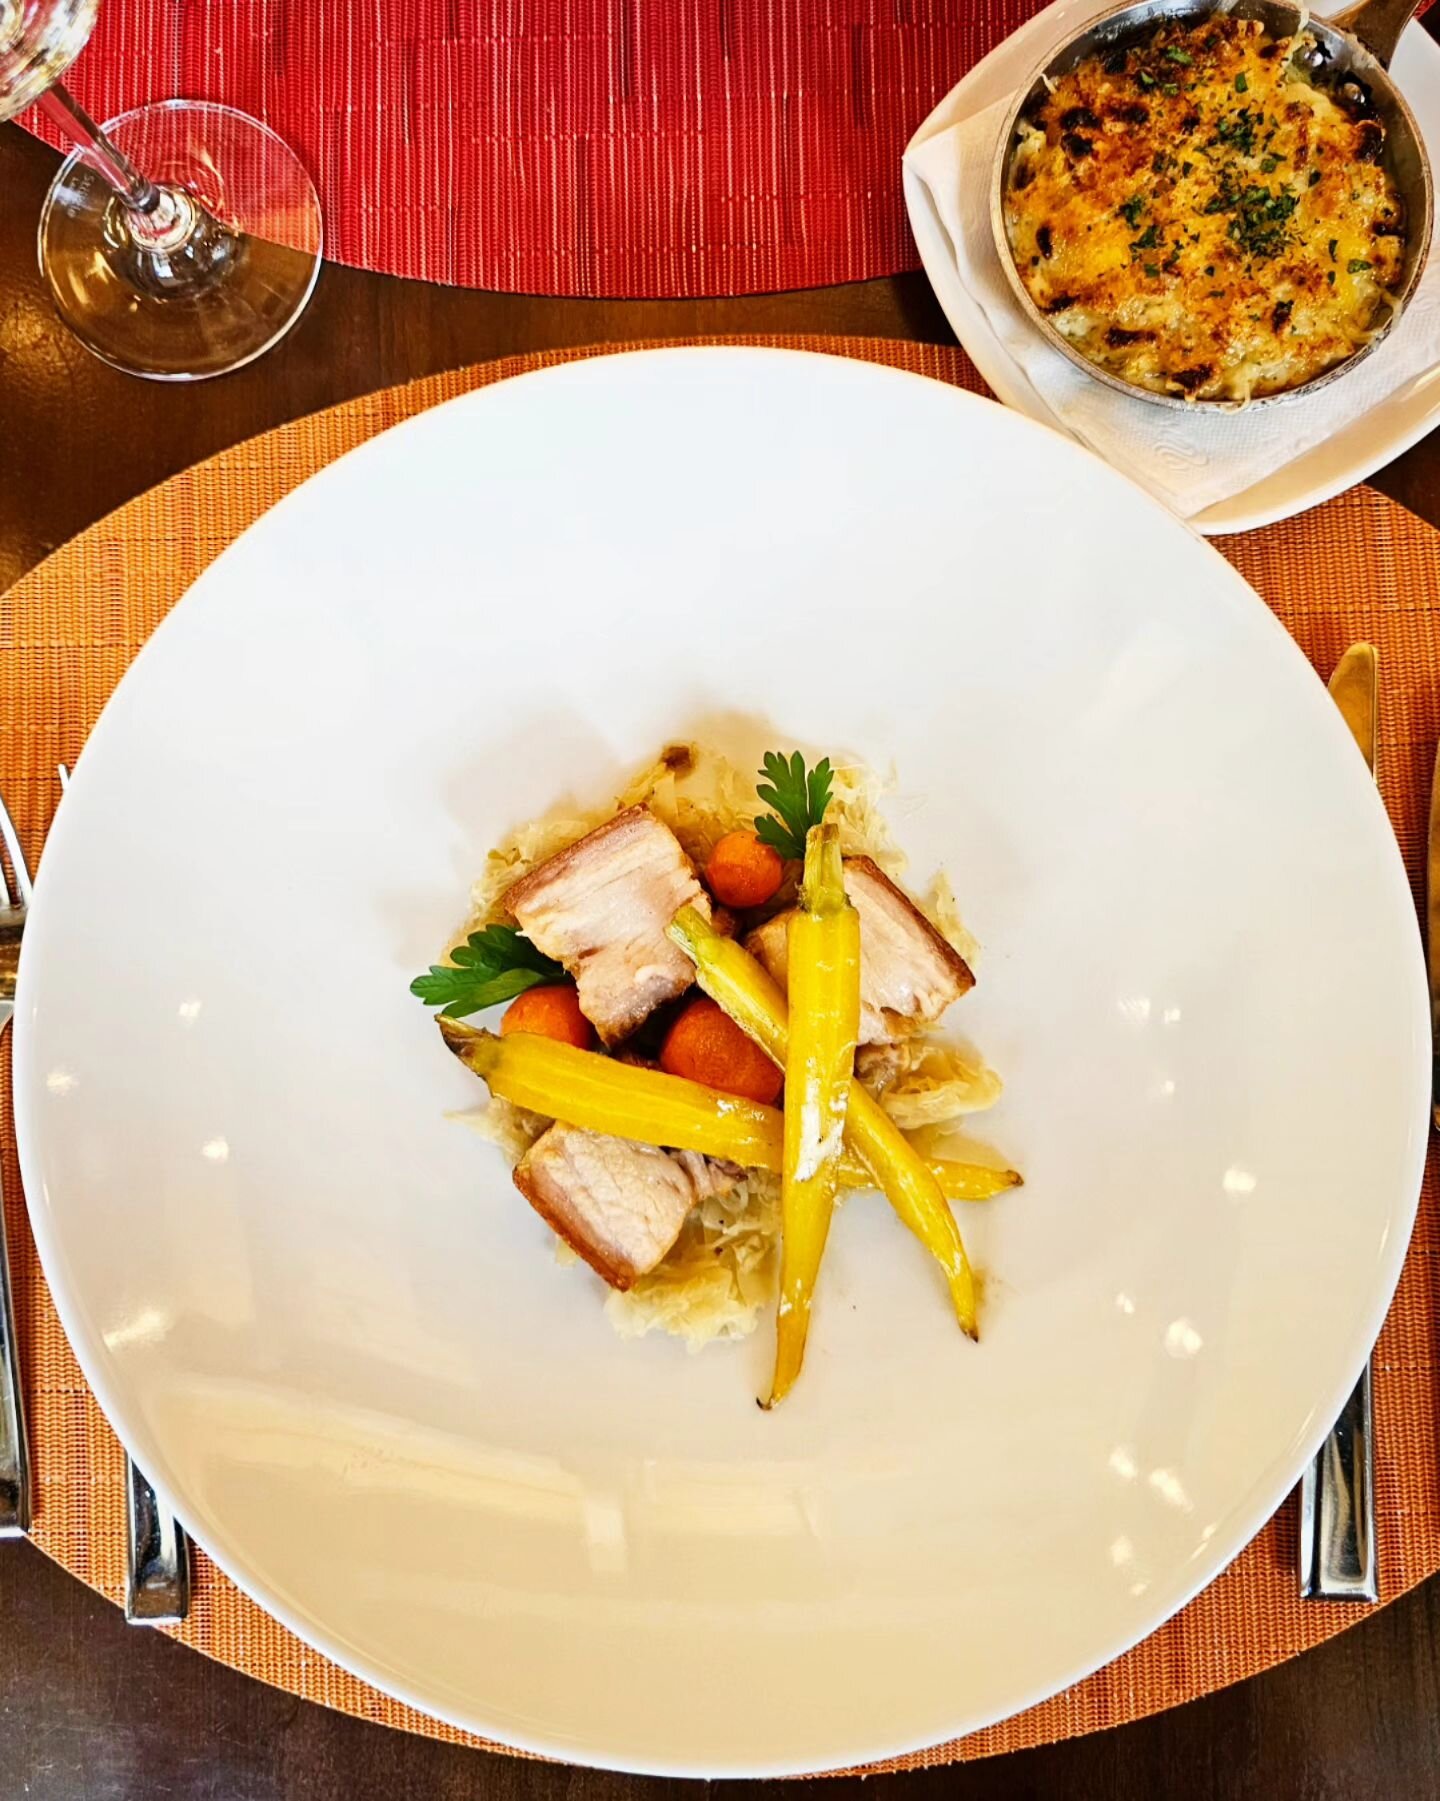 Pork Belly Choucroute
~Spaetzle Gruy&egrave;re Gratin, Sauerkraut

The Chefs' House is a student-run, fine dining experience located in the heart of downtown Toronto.

Book your reservation at opentable.ca 
.
.
.
.
.
.
.
.
.
.
#thechefshouse #georgeb